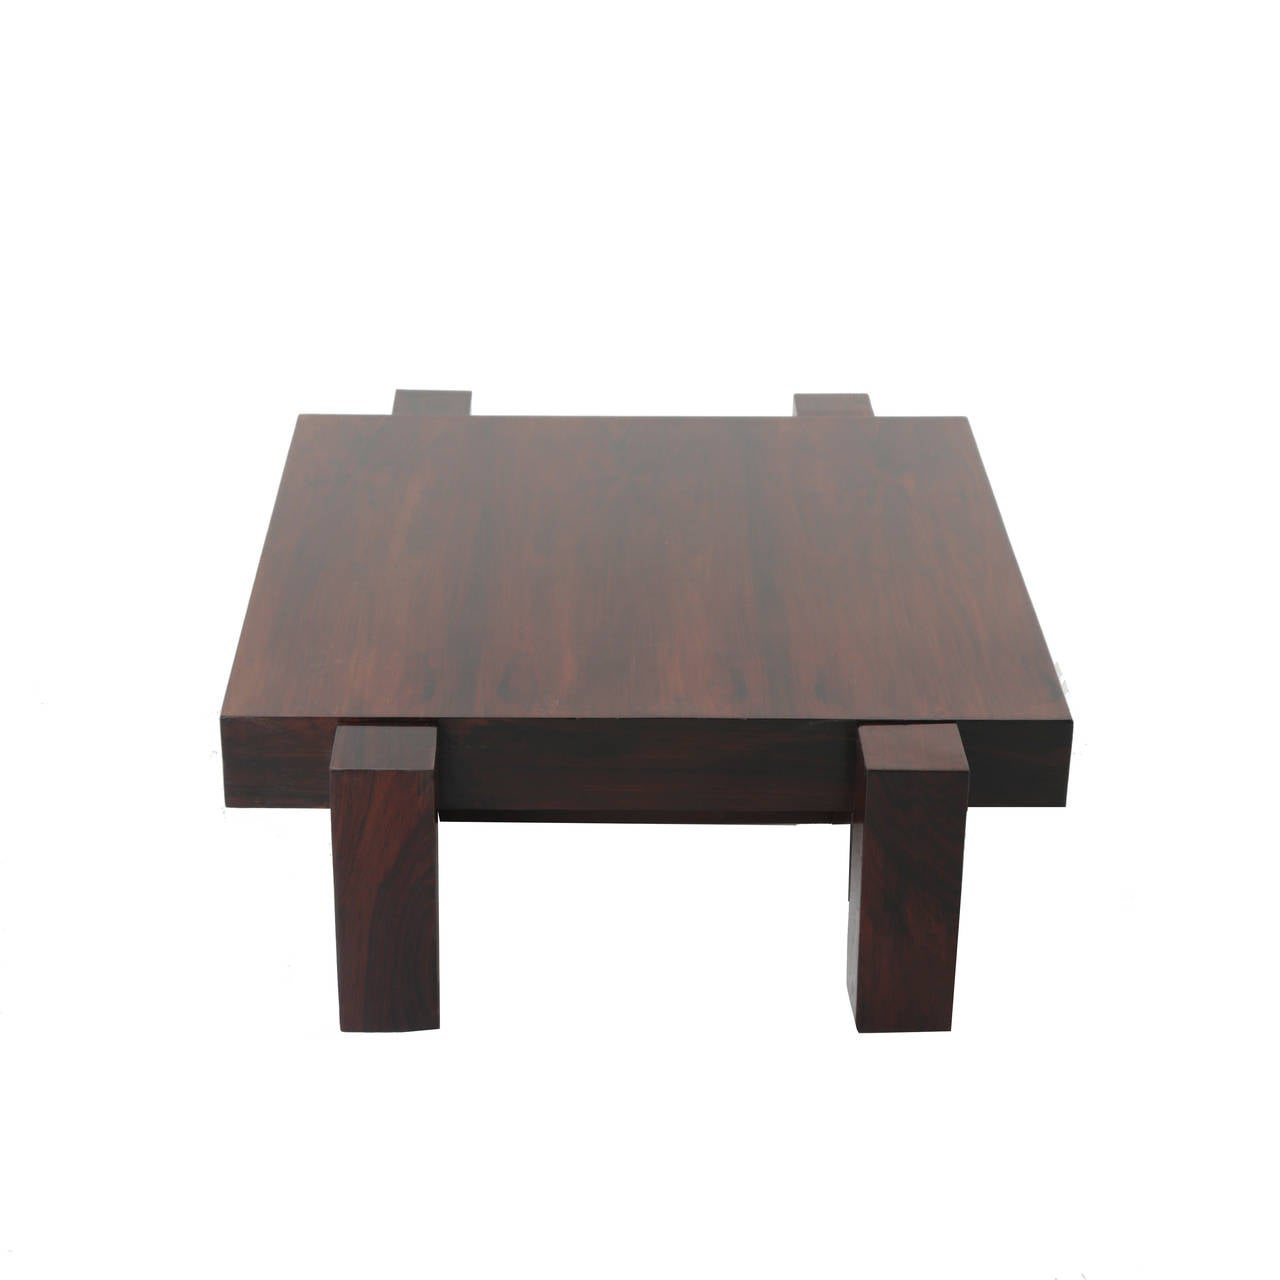 A low, Rosewood coffee table with thick rectangular legs from Brazil.

Many pieces are stored in our warehouse, so please click on CONTACT DEALER under our logo below to find out if the pieces you are interested in seeing are on the gallery floor.